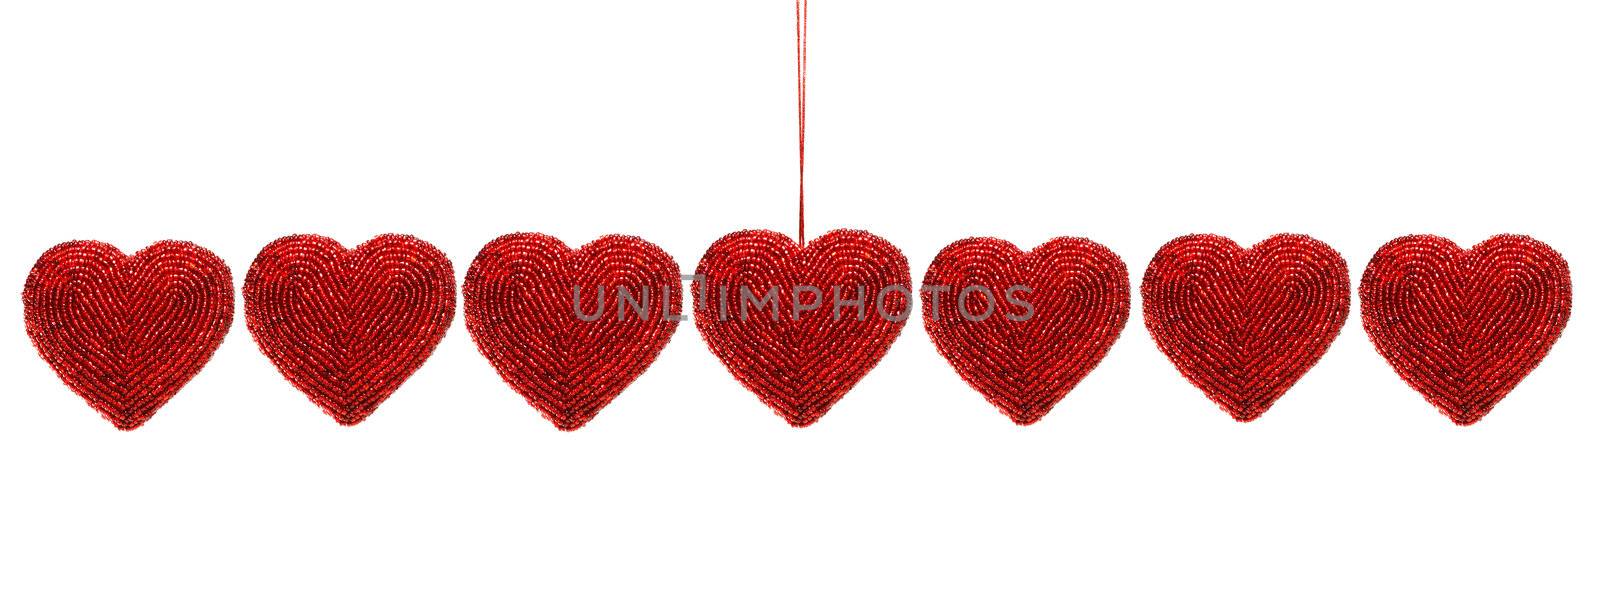 Red beaded hearts isolated against white background